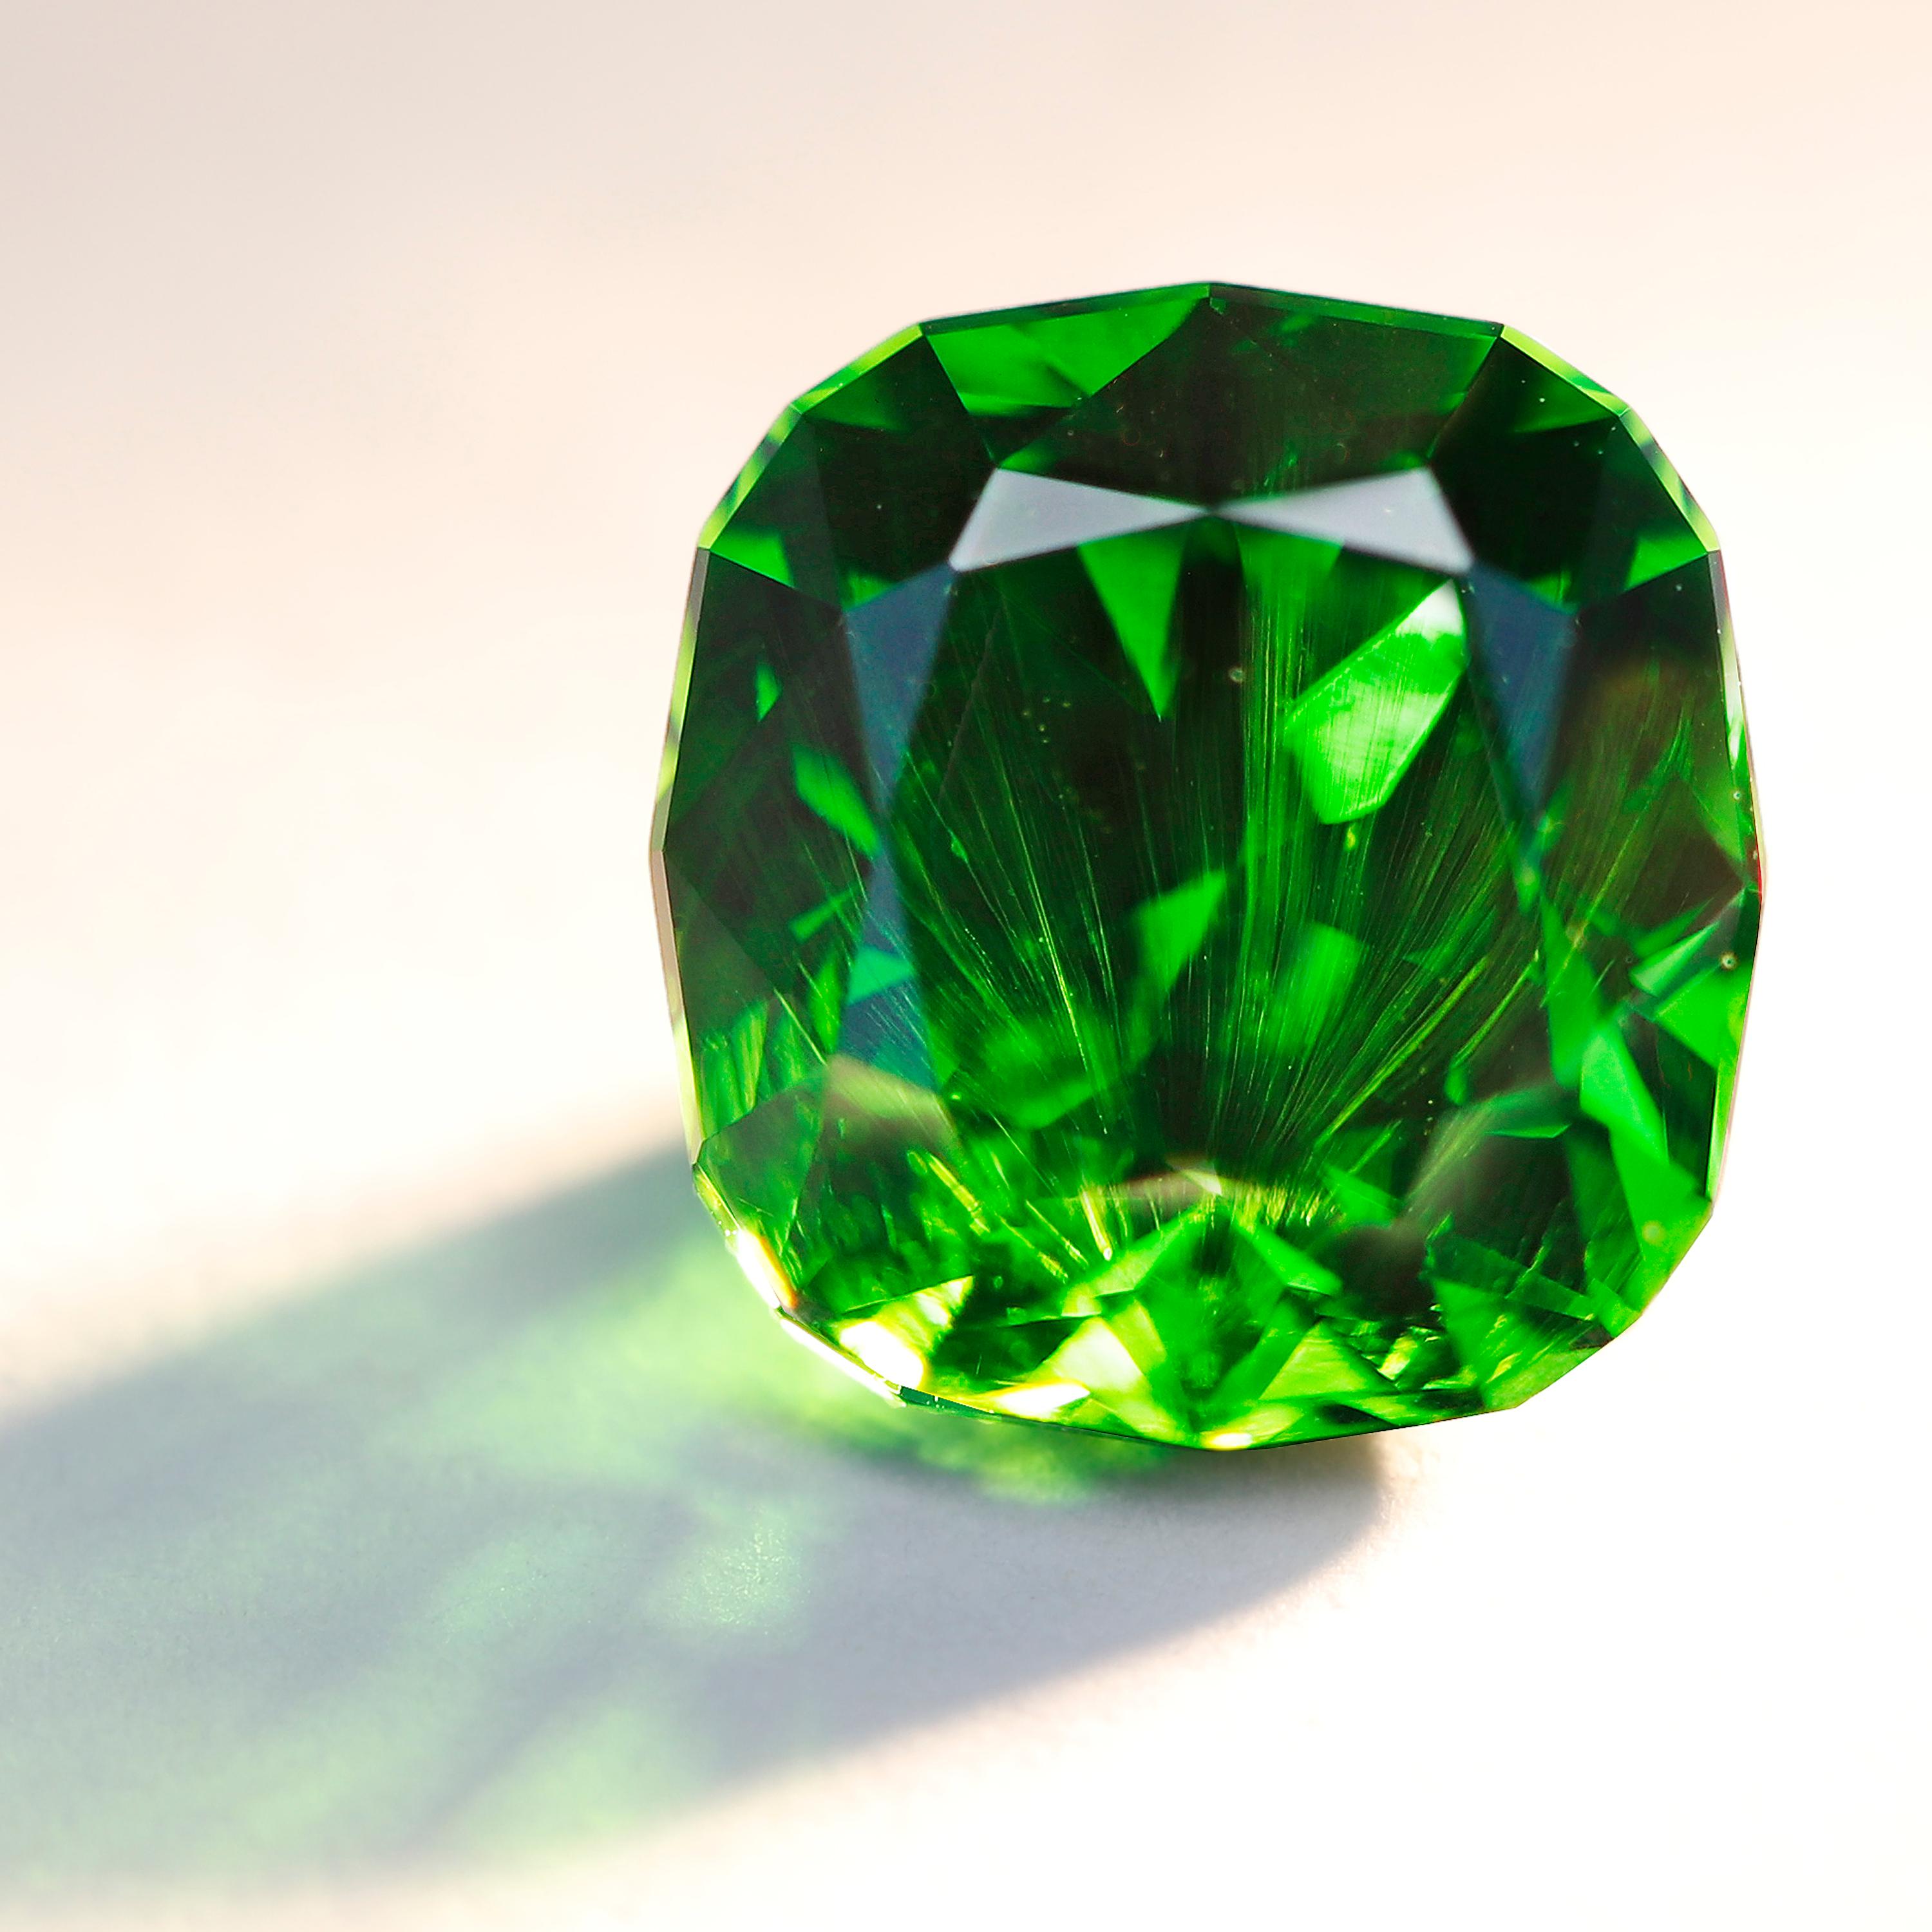 Ural Mountains of Russia is the most important and consistent source of the rarest variety of Garnets - Demantoid.  
The stones from this region are famous for their vivid green hue, high dispersion and characteristic horsetail inclusion. 